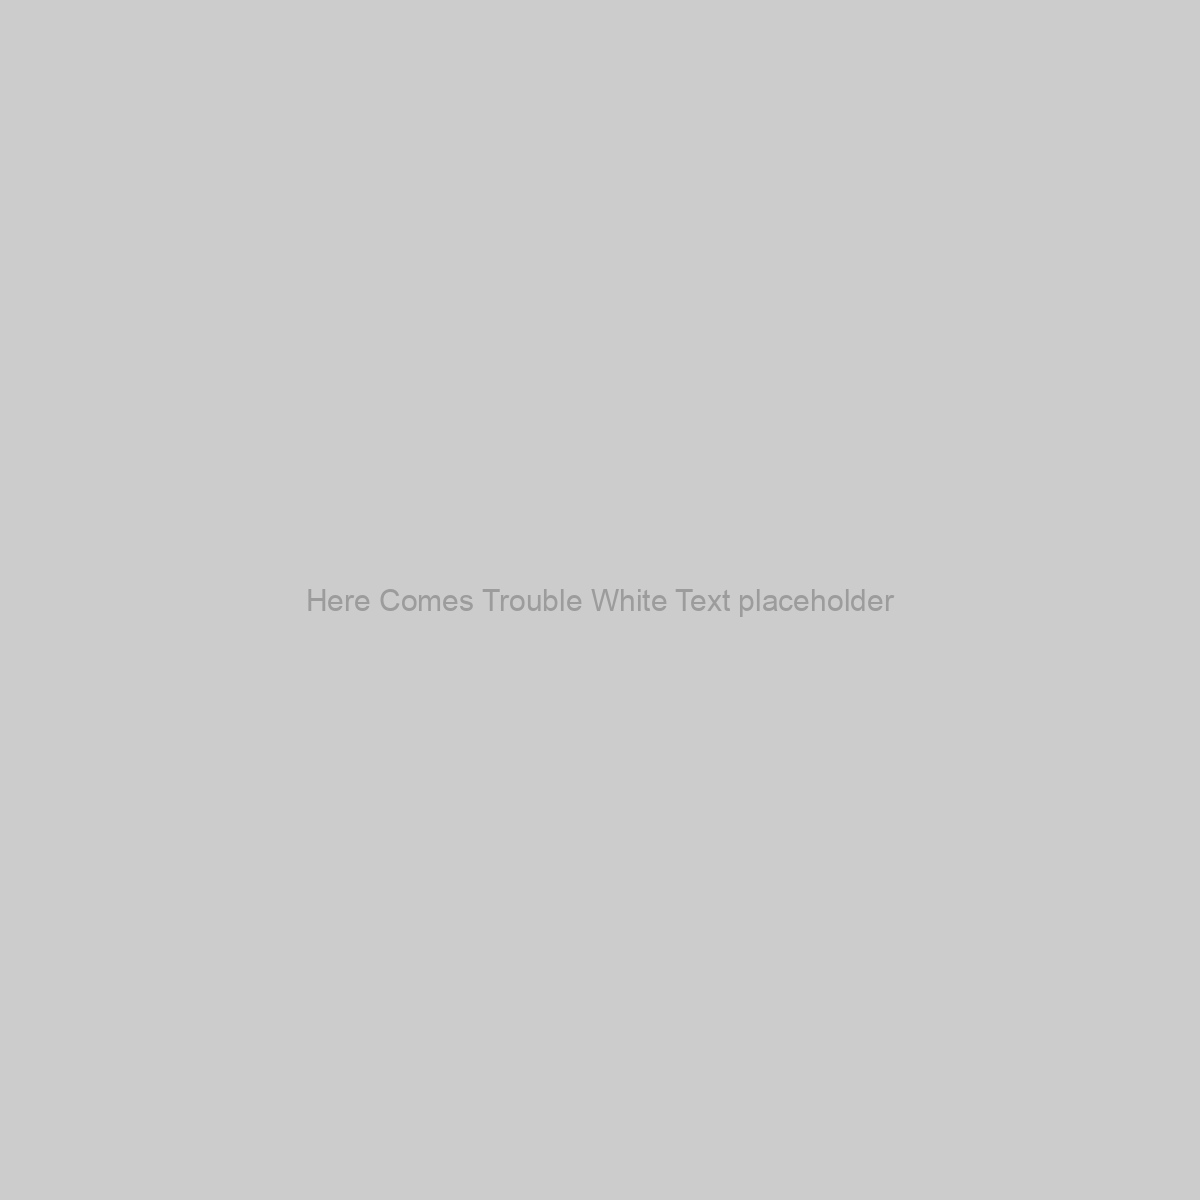 Here Comes Trouble White Text Placeholder Image